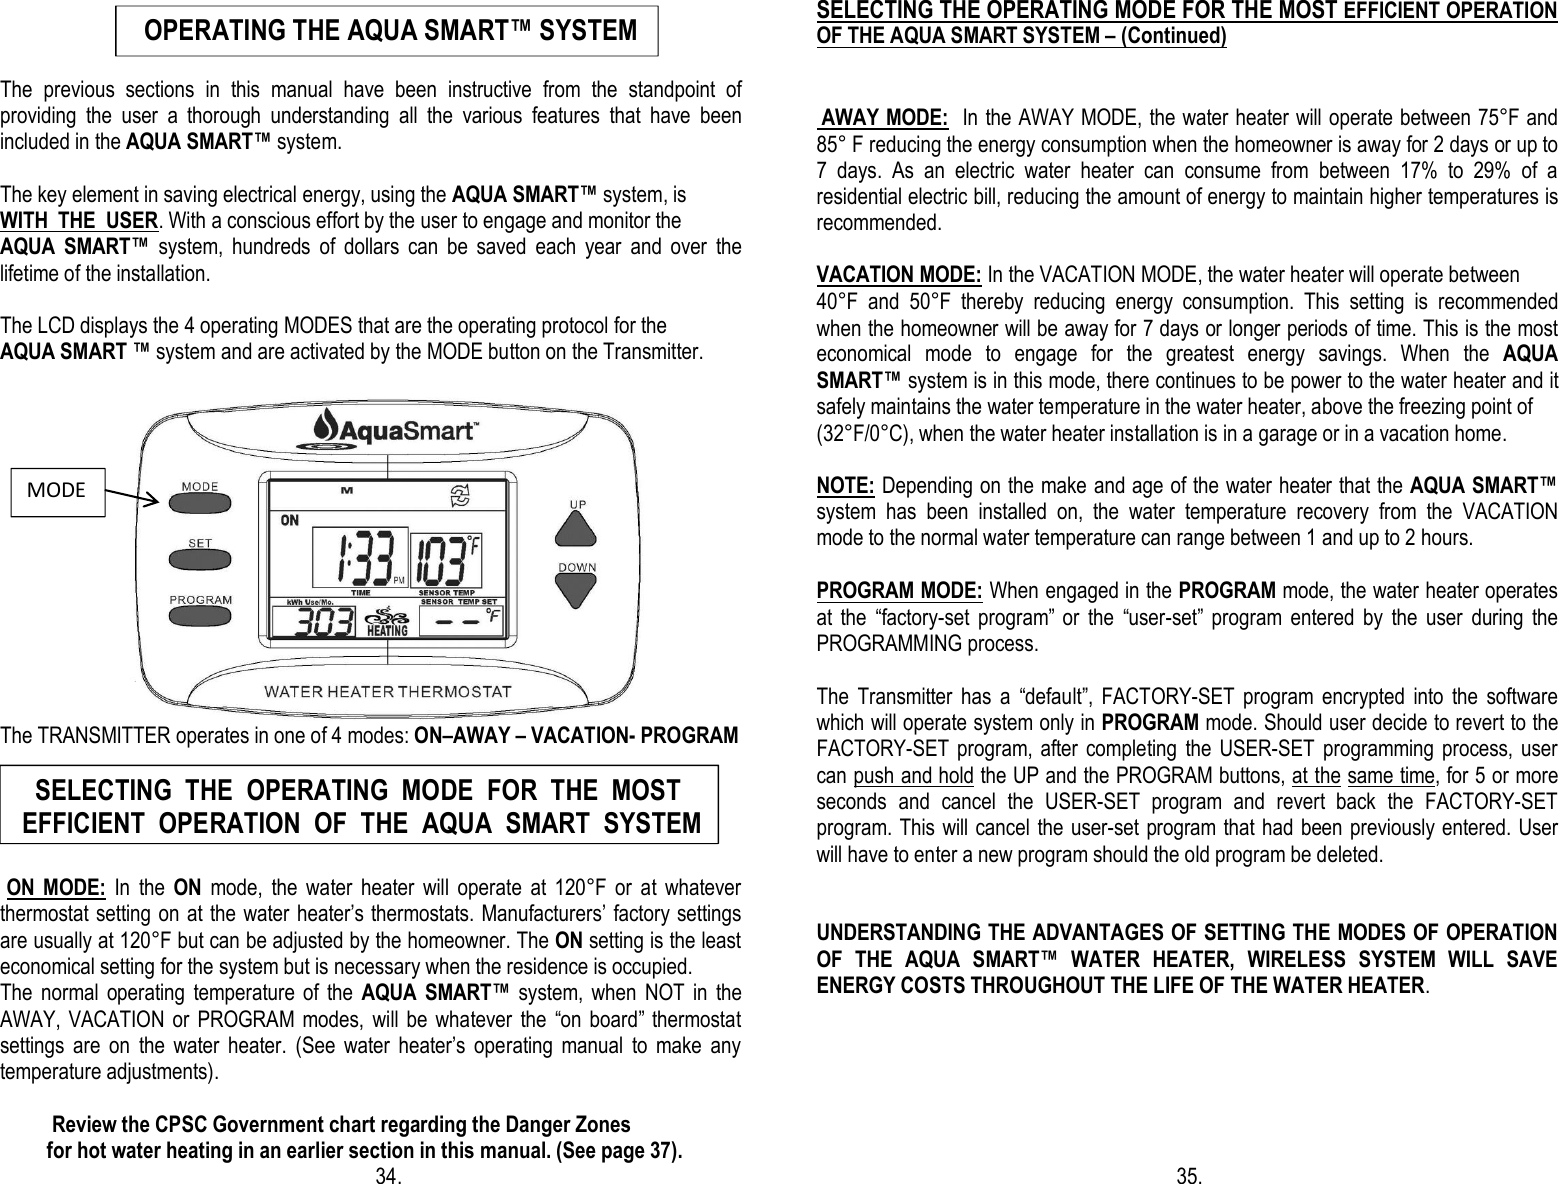                                           The  previous  sections  in  this  manual  have  been  instructive  from  the  standpoint  of providing  the  user  a  thorough  understanding  all  the  various  features  that  have  been included in the AQUA SMART™ system.  The key element in saving electrical energy, using the AQUA SMART™ system, is  WITH  THE  USER. With a conscious effort by the user to engage and monitor the  AQUA  SMART™  system,  hundreds  of  dollars  can  be  saved  each  year  and  over  the lifetime of the installation.                                       The LCD displays the 4 operating MODES that are the operating protocol for the  AQUA SMART ™ system and are activated by the MODE button on the Transmitter.                             The TRANSMITTER operates in one of 4 modes: ON–AWAY – VACATION- PROGRAM                                                                                           ON  MODE:  In  the  ON  mode,  the  water  heater  will  operate  at  120°F  or  at  whatever thermostat setting on at the water heater’s thermostats. Manufacturers’ factory settings are usually at 120°F but can be adjusted by the homeowner. The ON setting is the least economical setting for the system but is necessary when the residence is occupied. The  normal  operating  temperature  of  the  AQUA  SMART™  system,  when  NOT  in  the AWAY, VACATION  or  PROGRAM  modes,  will be  whatever  the  “on  board” thermostat settings  are  on  the  water  heater.  (See  water  heater’s  operating  manual  to  make  any temperature adjustments).             Review the CPSC Government chart regarding the Danger Zones           for hot water heating in an earlier section in this manual. (See page 37).                                                                         34.                                        SELECTING THE OPERATING MODE FOR THE MOST EFFICIENT OPERATION OF THE AQUA SMART SYSTEM – (Continued)    AWAY MODE:  In the AWAY MODE, the water heater will operate between 75°F and 85° F reducing the energy consumption when the homeowner is away for 2 days or up to 7  days.  As  an  electric  water  heater  can  consume  from  between  17%  to  29%  of  a residential electric bill, reducing the amount of energy to maintain higher temperatures is recommended.  VACATION MODE: In the VACATION MODE, the water heater will operate between  40°F  and  50°F  thereby  reducing  energy  consumption.  This  setting  is  recommended when the homeowner will be away for 7 days or longer periods of time. This is the most economical  mode  to  engage  for  the  greatest  energy  savings.  When  the  AQUA SMART™ system is in this mode, there continues to be power to the water heater and it safely maintains the water temperature in the water heater, above the freezing point of  (32°F/0°C), when the water heater installation is in a garage or in a vacation home.  NOTE: Depending on the make and age of the water heater that the AQUA SMART™ system  has  been  installed  on,  the  water  temperature  recovery  from  the  VACATION mode to the normal water temperature can range between 1 and up to 2 hours.  PROGRAM MODE: When engaged in the PROGRAM mode, the water heater operates at  the  “factory-set  program”  or  the  “user-set”  program  entered  by  the  user  during  the PROGRAMMING process.   The  Transmitter  has  a  “default”,  FACTORY-SET  program  encrypted  into  the  software which will operate system only in PROGRAM mode. Should user decide to revert to the FACTORY-SET program,  after  completing  the USER-SET  programming  process,  user can push and hold the UP and the PROGRAM buttons, at the same time, for 5 or more seconds  and  cancel  the  USER-SET  program  and  revert  back  the  FACTORY-SET program. This will  cancel the user-set program that had been previously entered. User will have to enter a new program should the old program be deleted.   UNDERSTANDING THE ADVANTAGES OF SETTING THE MODES OF OPERATION OF  THE  AQUA  SMART™  WATER  HEATER,  WIRELESS  SYSTEM  WILL  SAVE ENERGY COSTS THROUGHOUT THE LIFE OF THE WATER HEATER.                                                                                                                                                                                                                                  35.  MODE     SELECTING  THE  OPERATING  MODE  FOR  THE  MOST  EFFICIENT  OPERATION  OF  THE  AQUA  SMART  SYSTEM         OPERATING THE AQUA SMART™ SYSTEM 